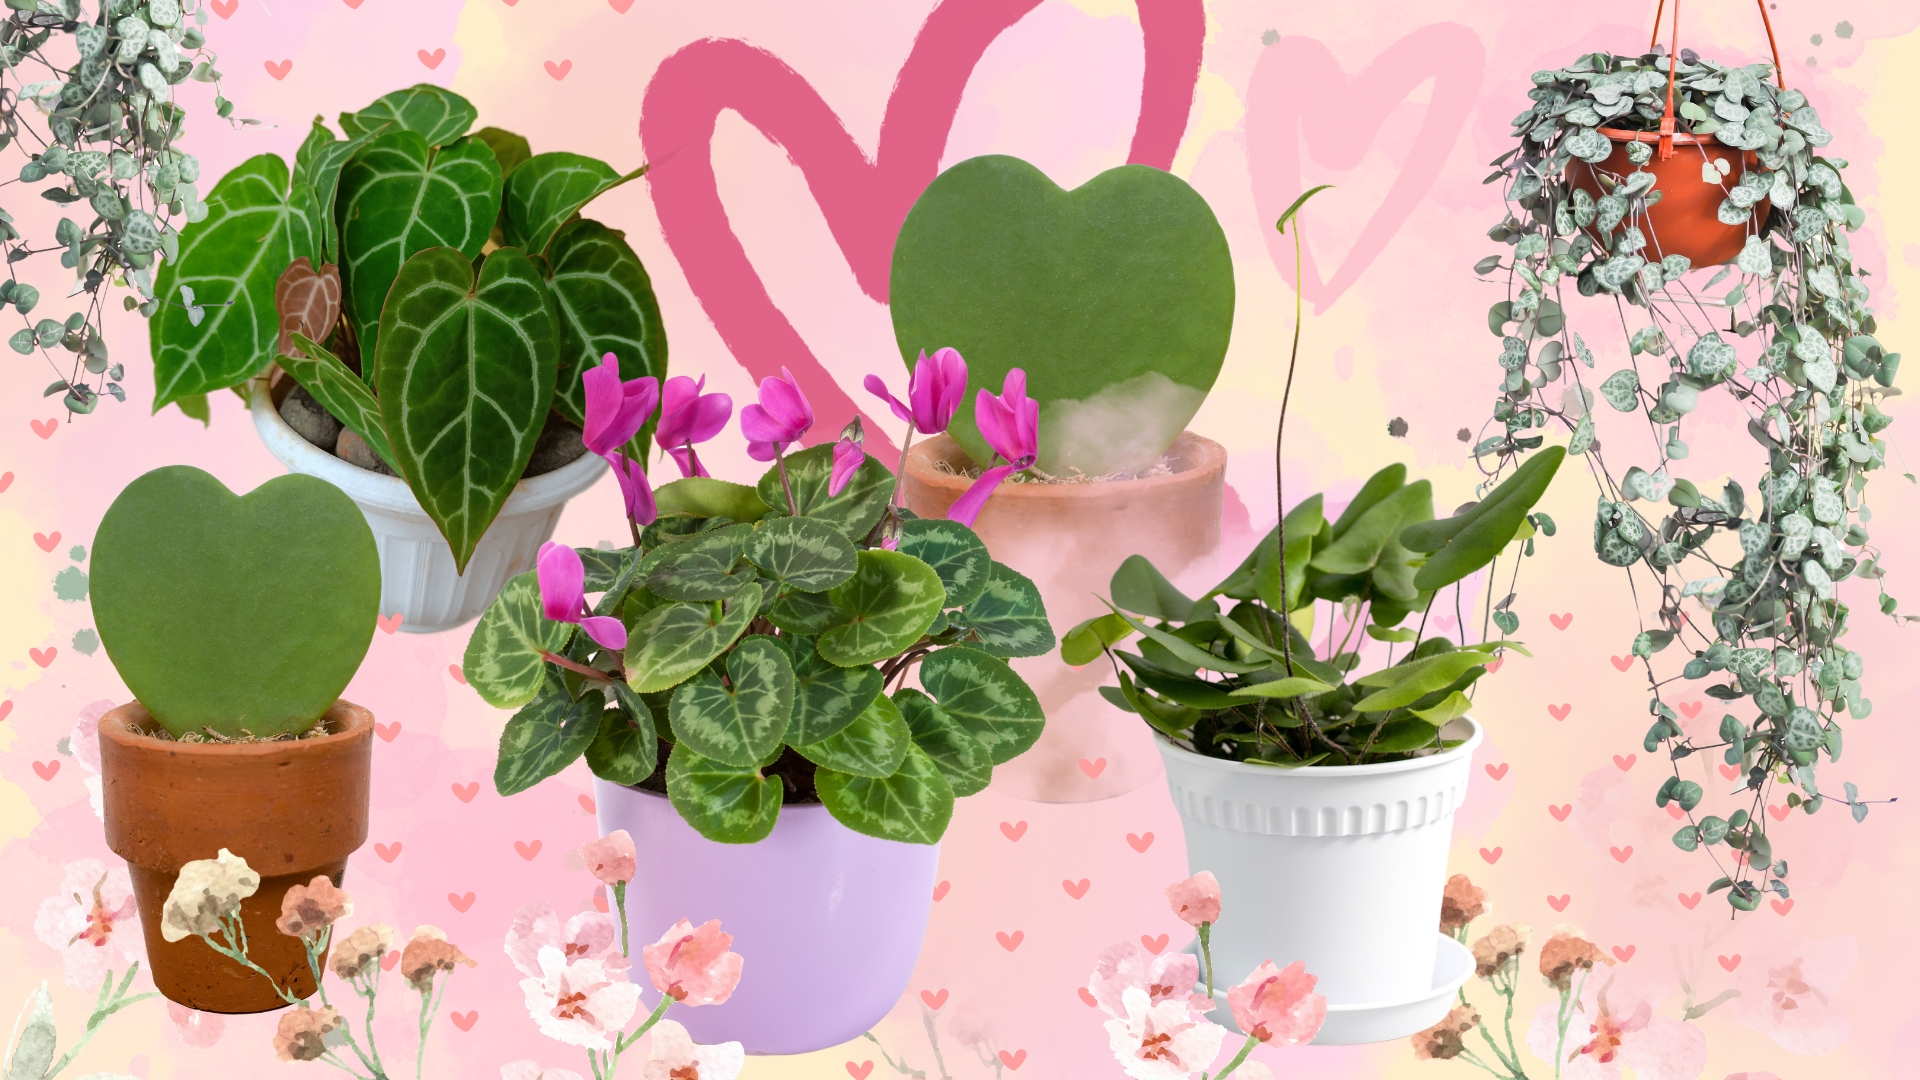 These 5 Heart-shaped Plants Are Perfect Gifts For Valentine’s Day 